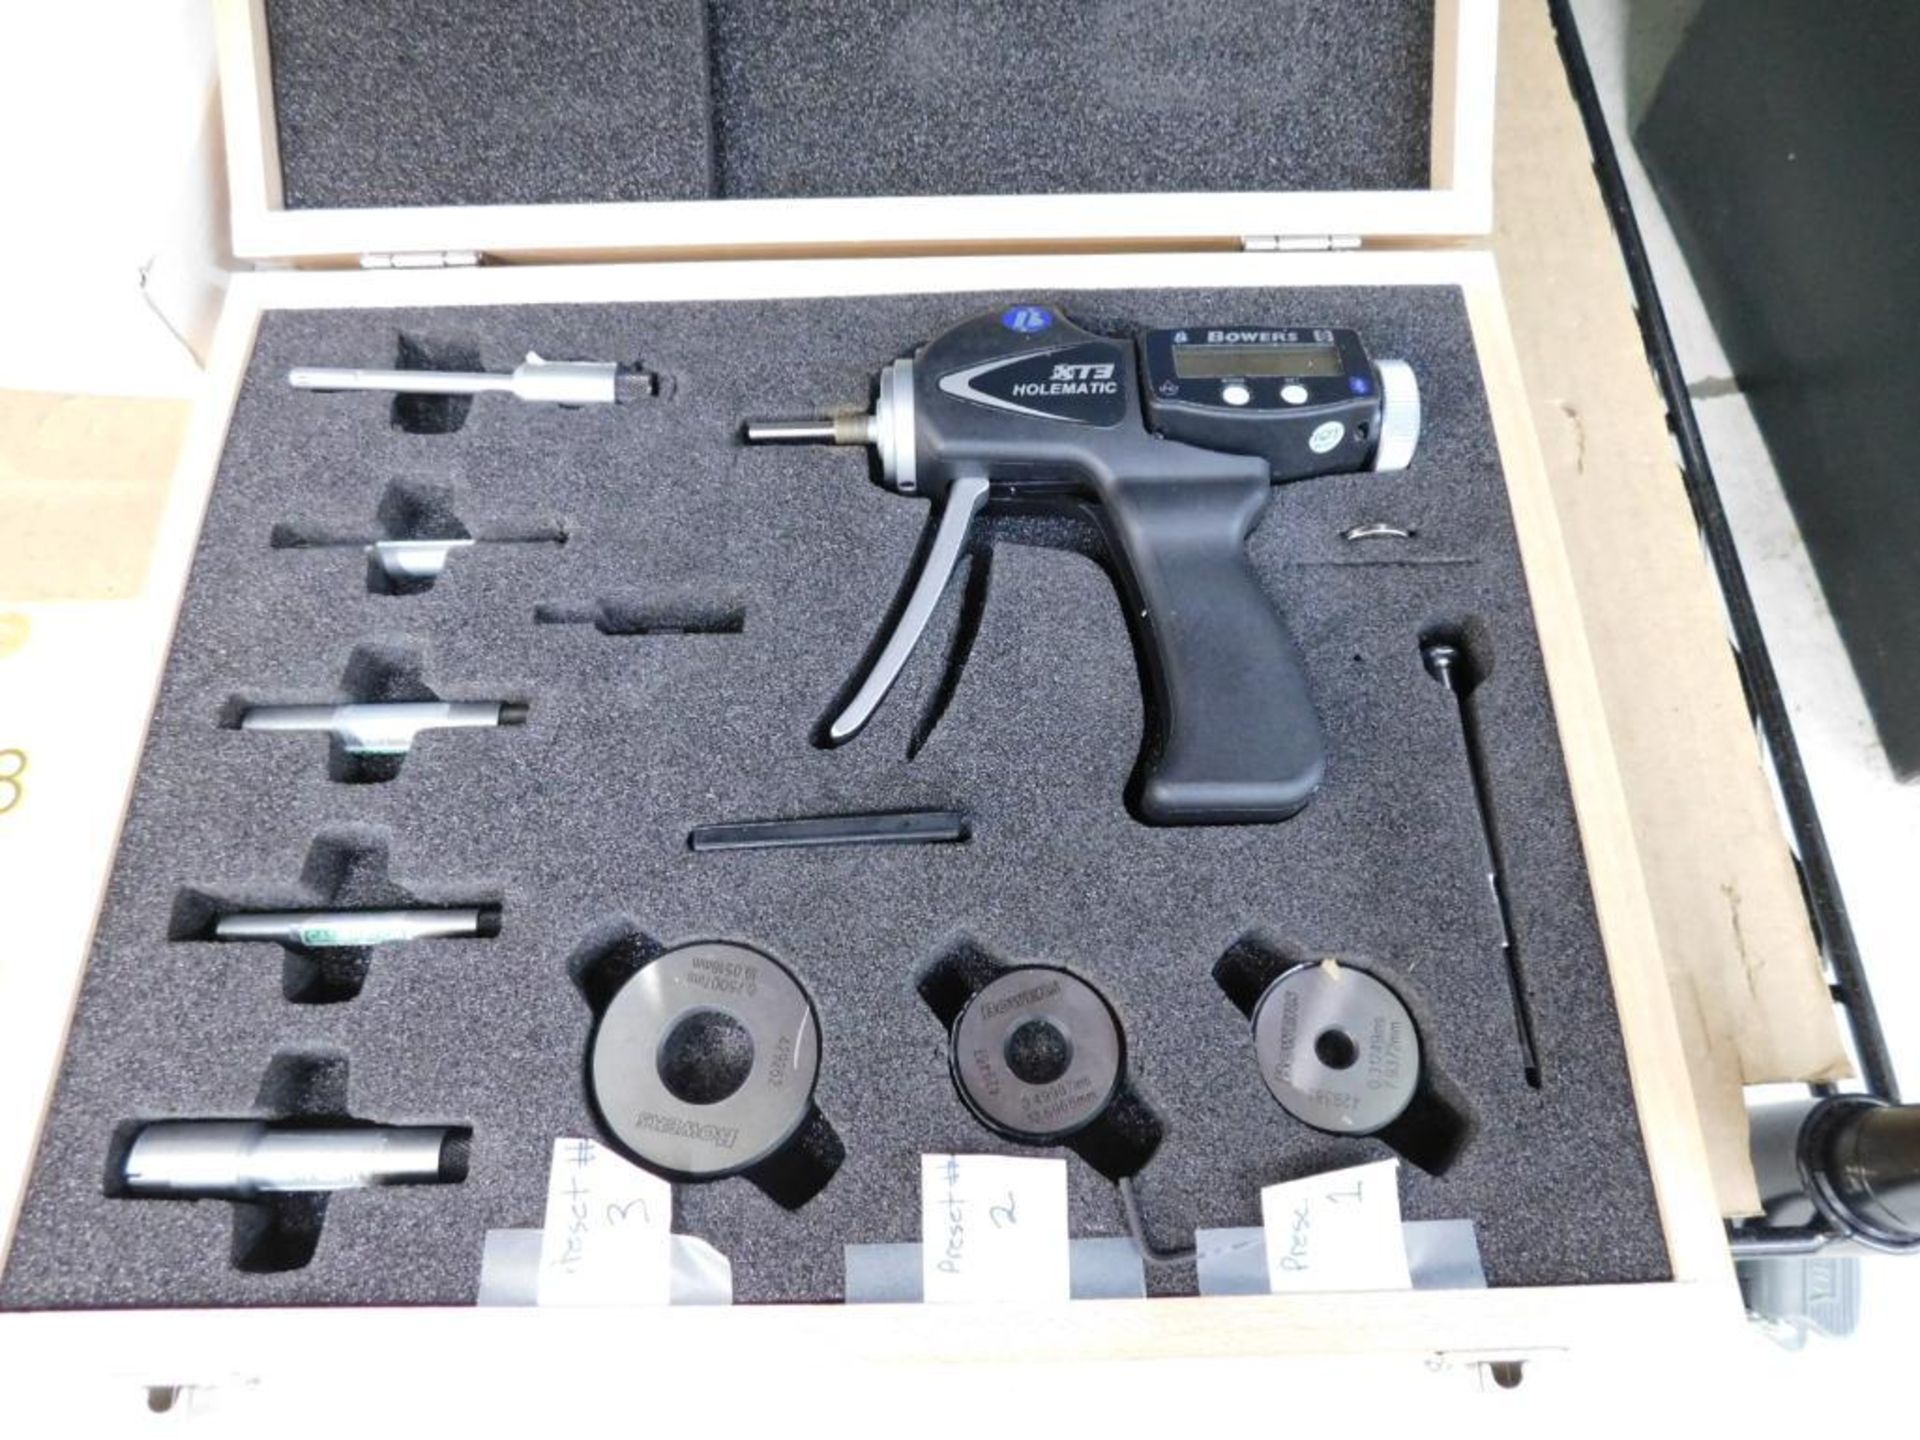 LOT: Assorted Digital ID Micrometers, Bowers XT3 Holematic Digital 3-Point ID Micrometer - Image 3 of 4